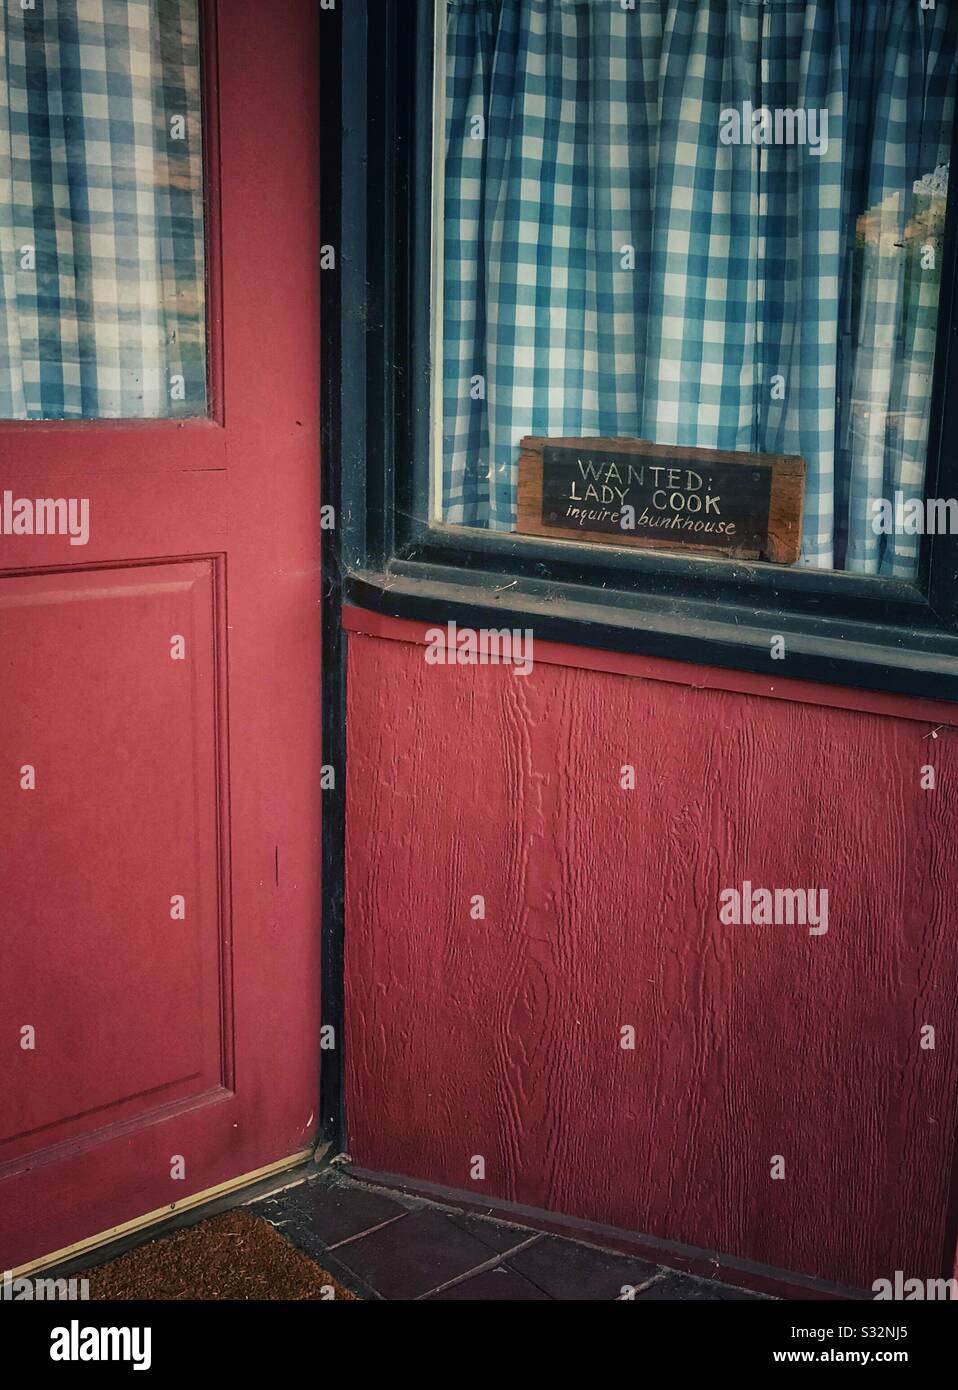 Red door and blue gingham curtains at restaurant with sign in window- Wanted: Lady Cook Inquire Bunkhouse Stock Photo